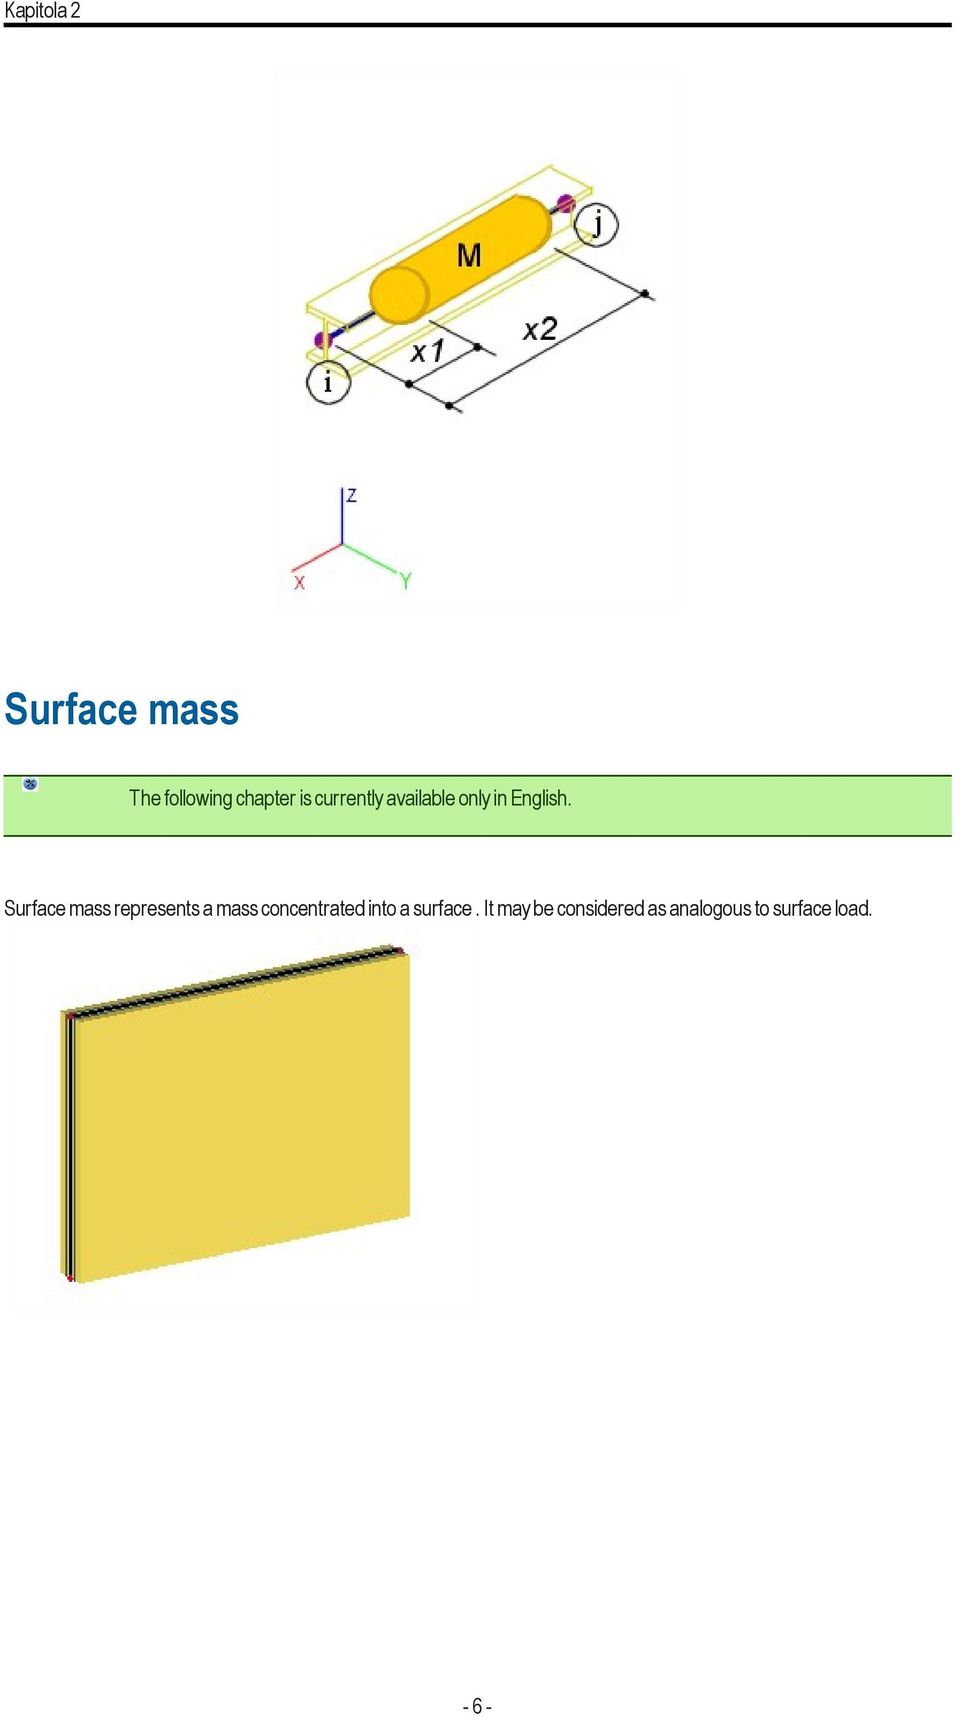 Surface mass represents a mass concentrated into a